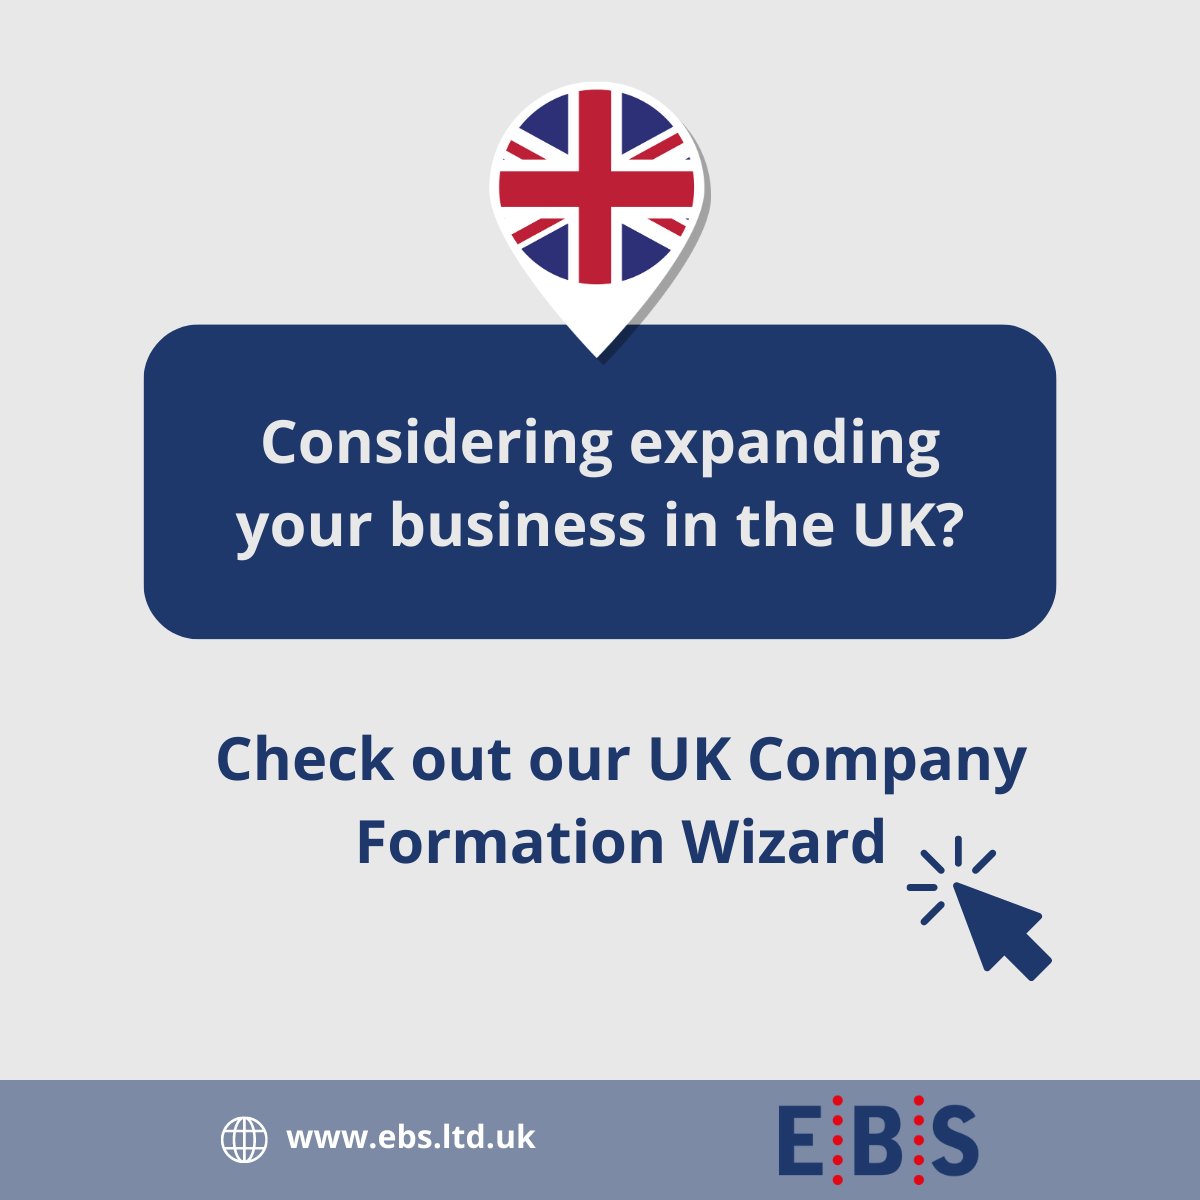 We understand that starting or expanding a business can be daunting, but we're on hand to support you at each step of your journey. Use our handy wizard to create a tailored list of resources, documents, and EBS services related to your individual needs: bit.ly/3C1adUZ